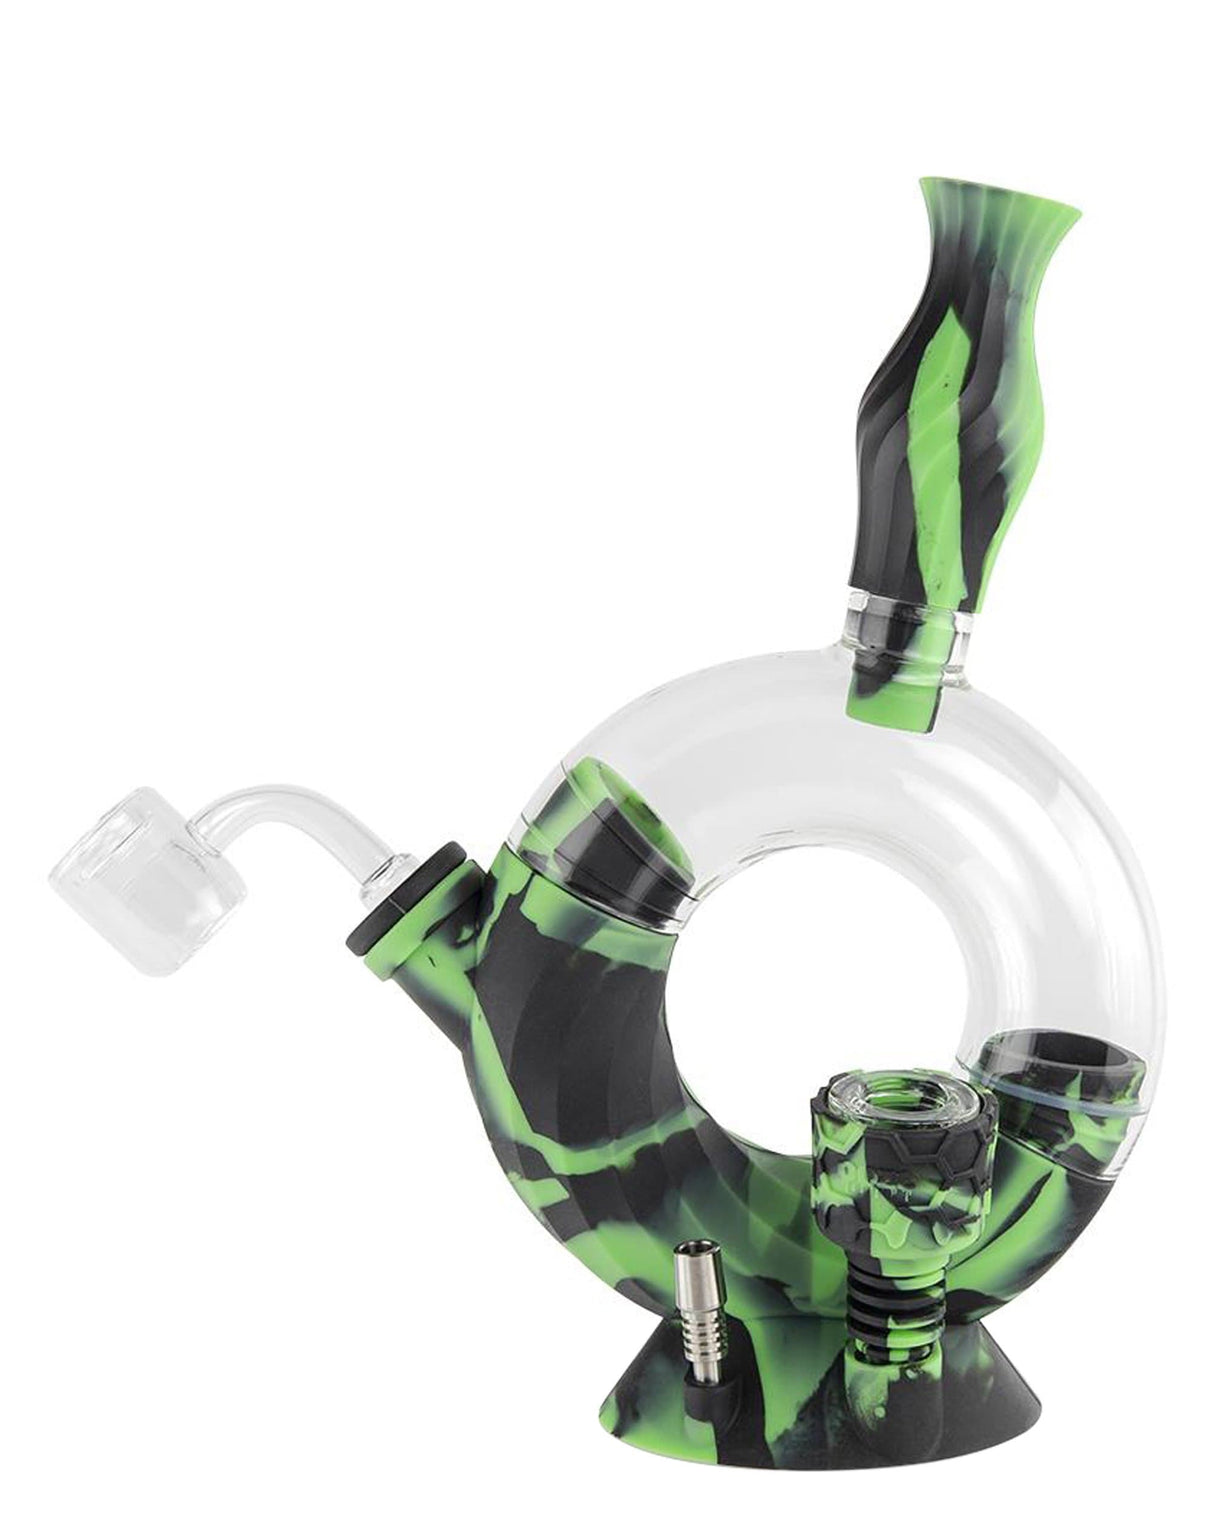 Ooze Ozone Silicone Bong in green camo, 8" with slitted percolator and quartz bowl, front view